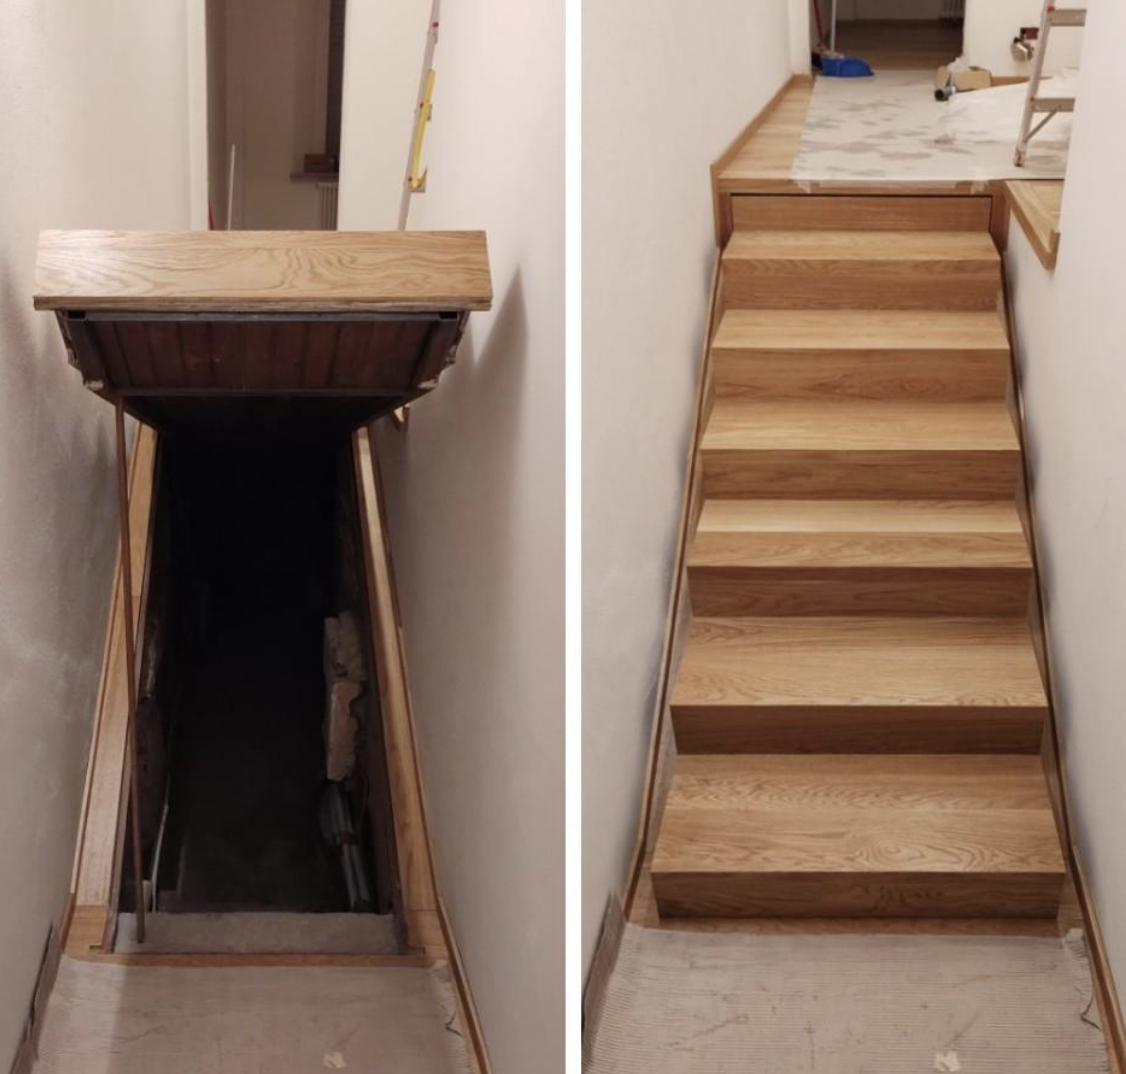 a trap door beneath the stairs leading to a basement